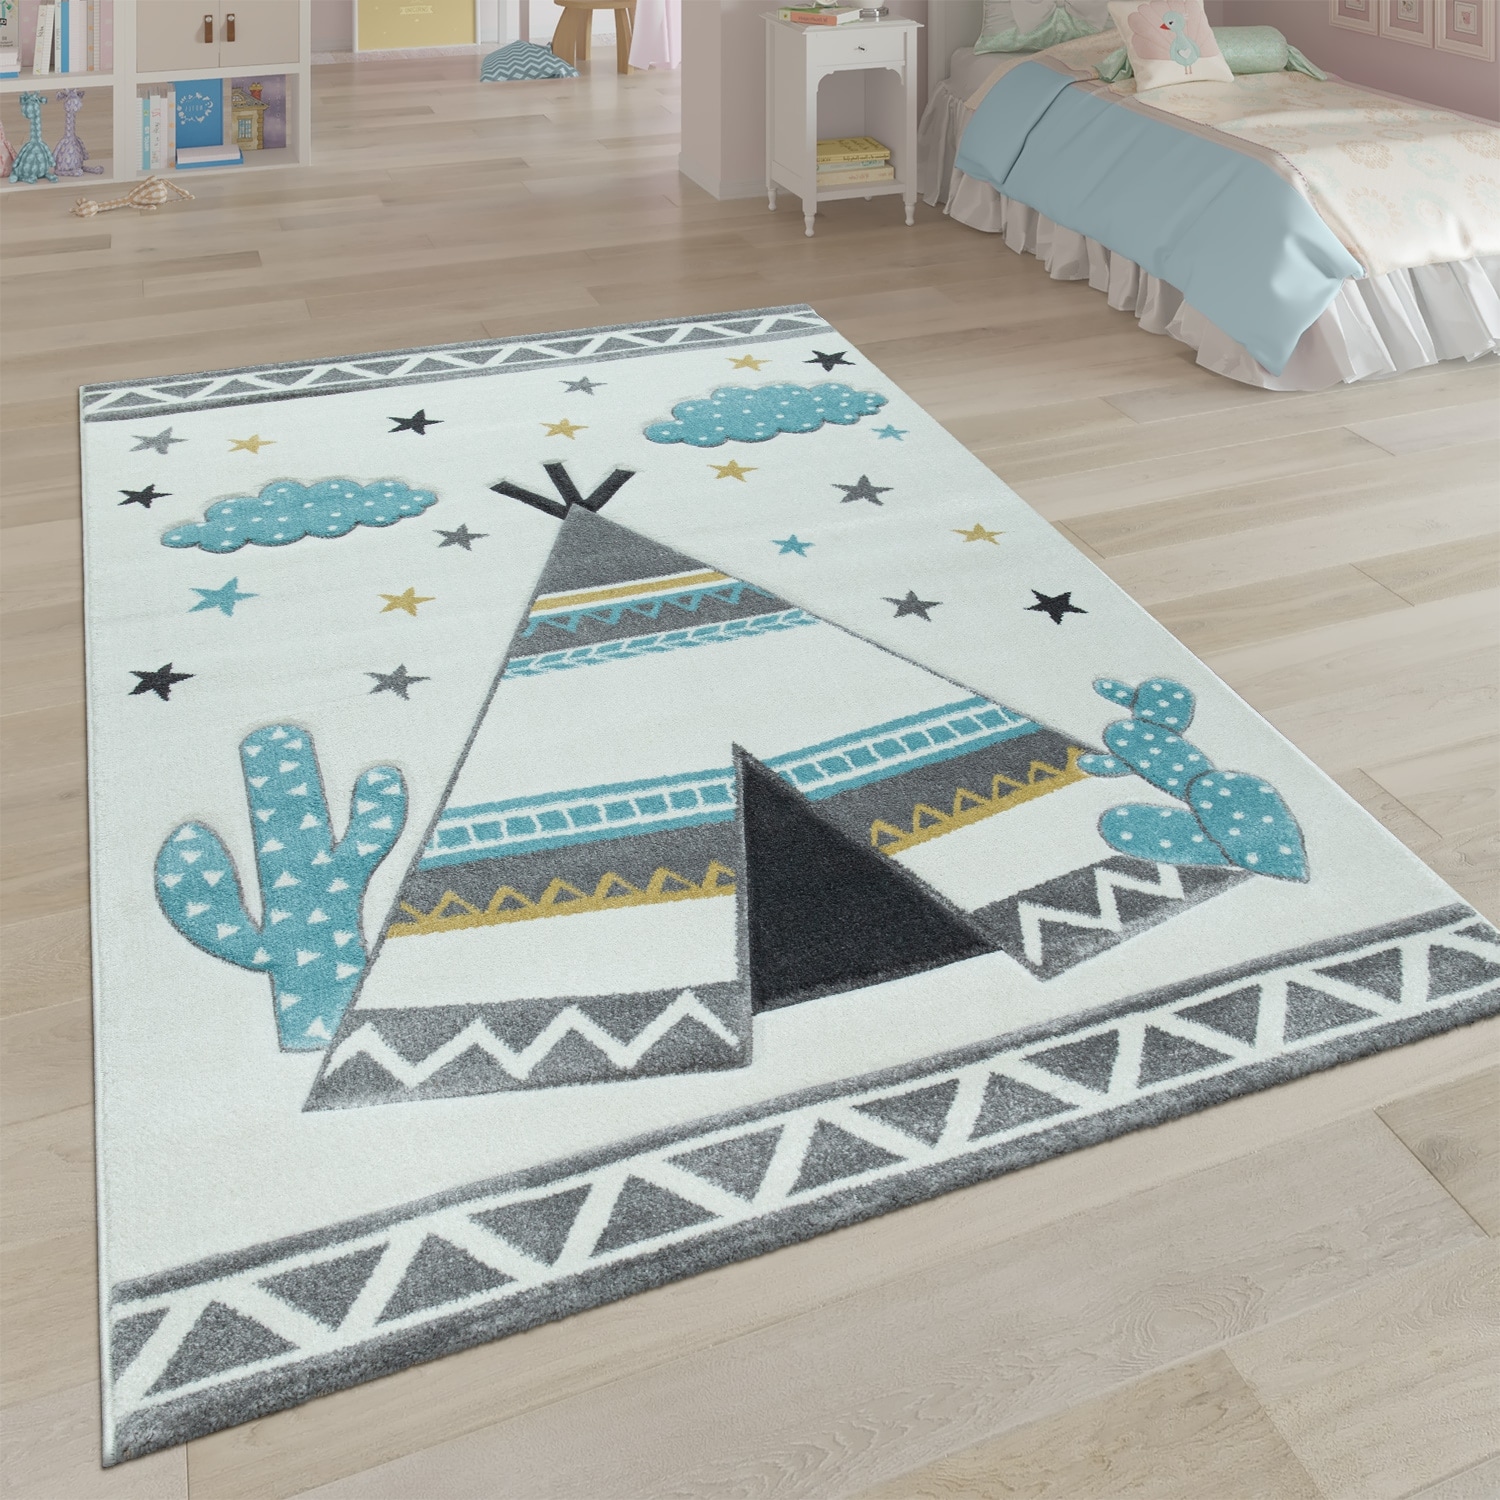 Kid's Rug for Children's Rooms in Beige Pastel Colors with Indian Tent -  Bed Bath & Beyond - 35157497